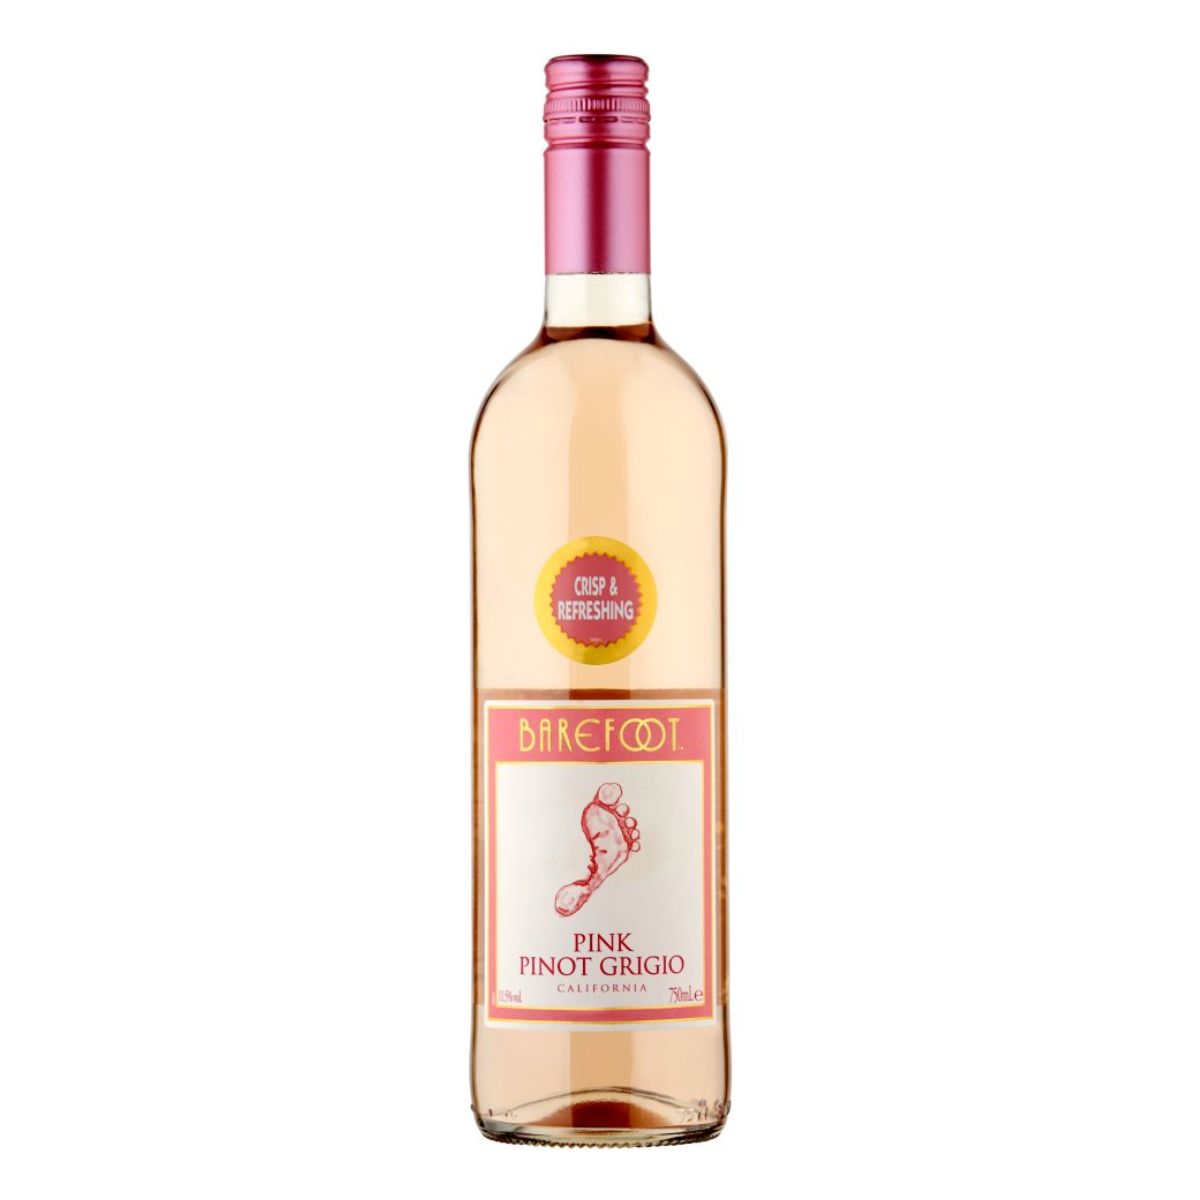 A bottle of Barefoot - Pink Pinot Grigio Rose Wine (12% ABV) - 750ml on a white background.